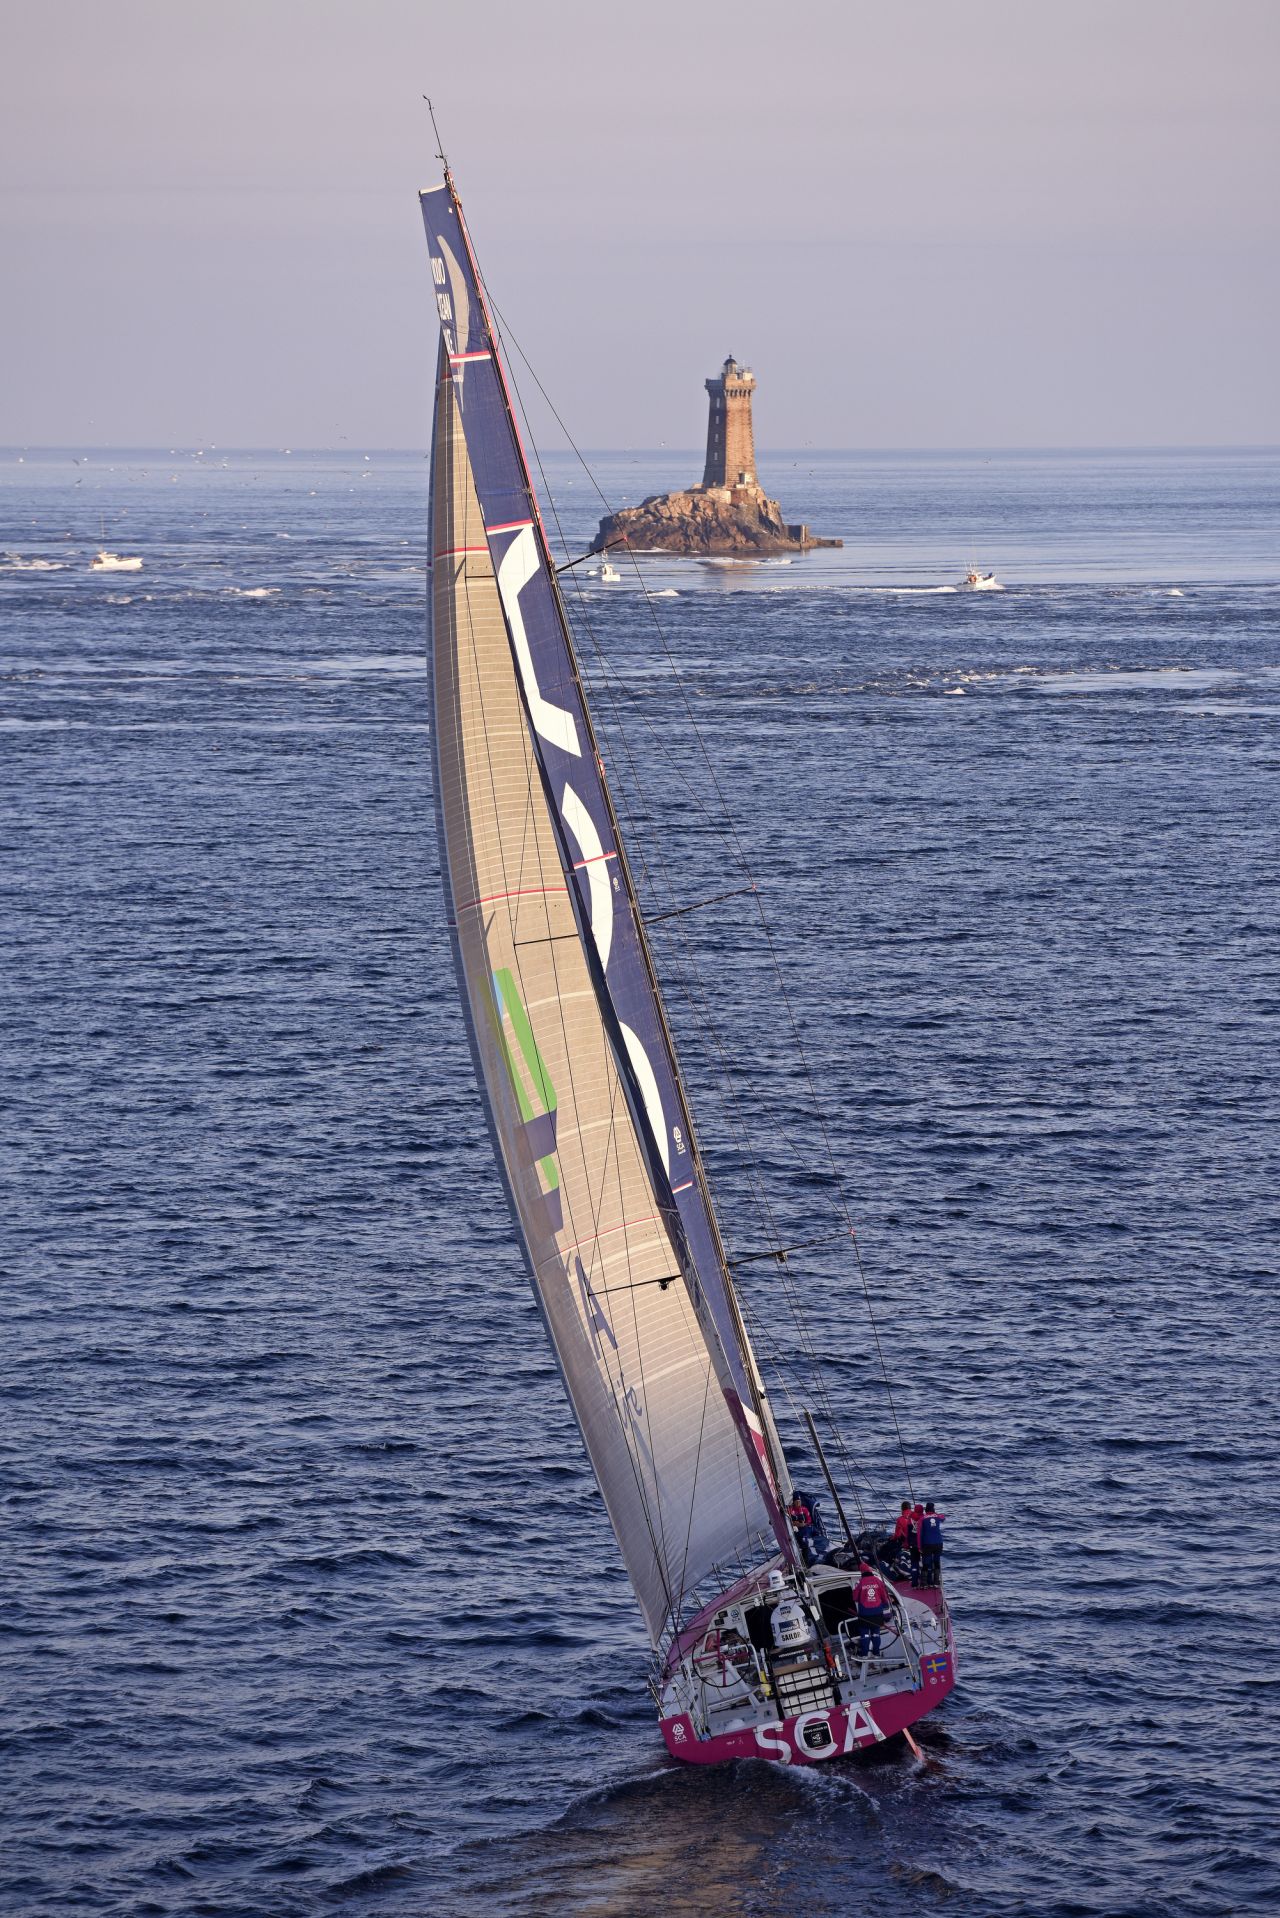 On a sparkling afternoon of sailing, the SCA boat navigates waters by an offshore lighthouse. Each crew in the race sailed an identically-designed boat.